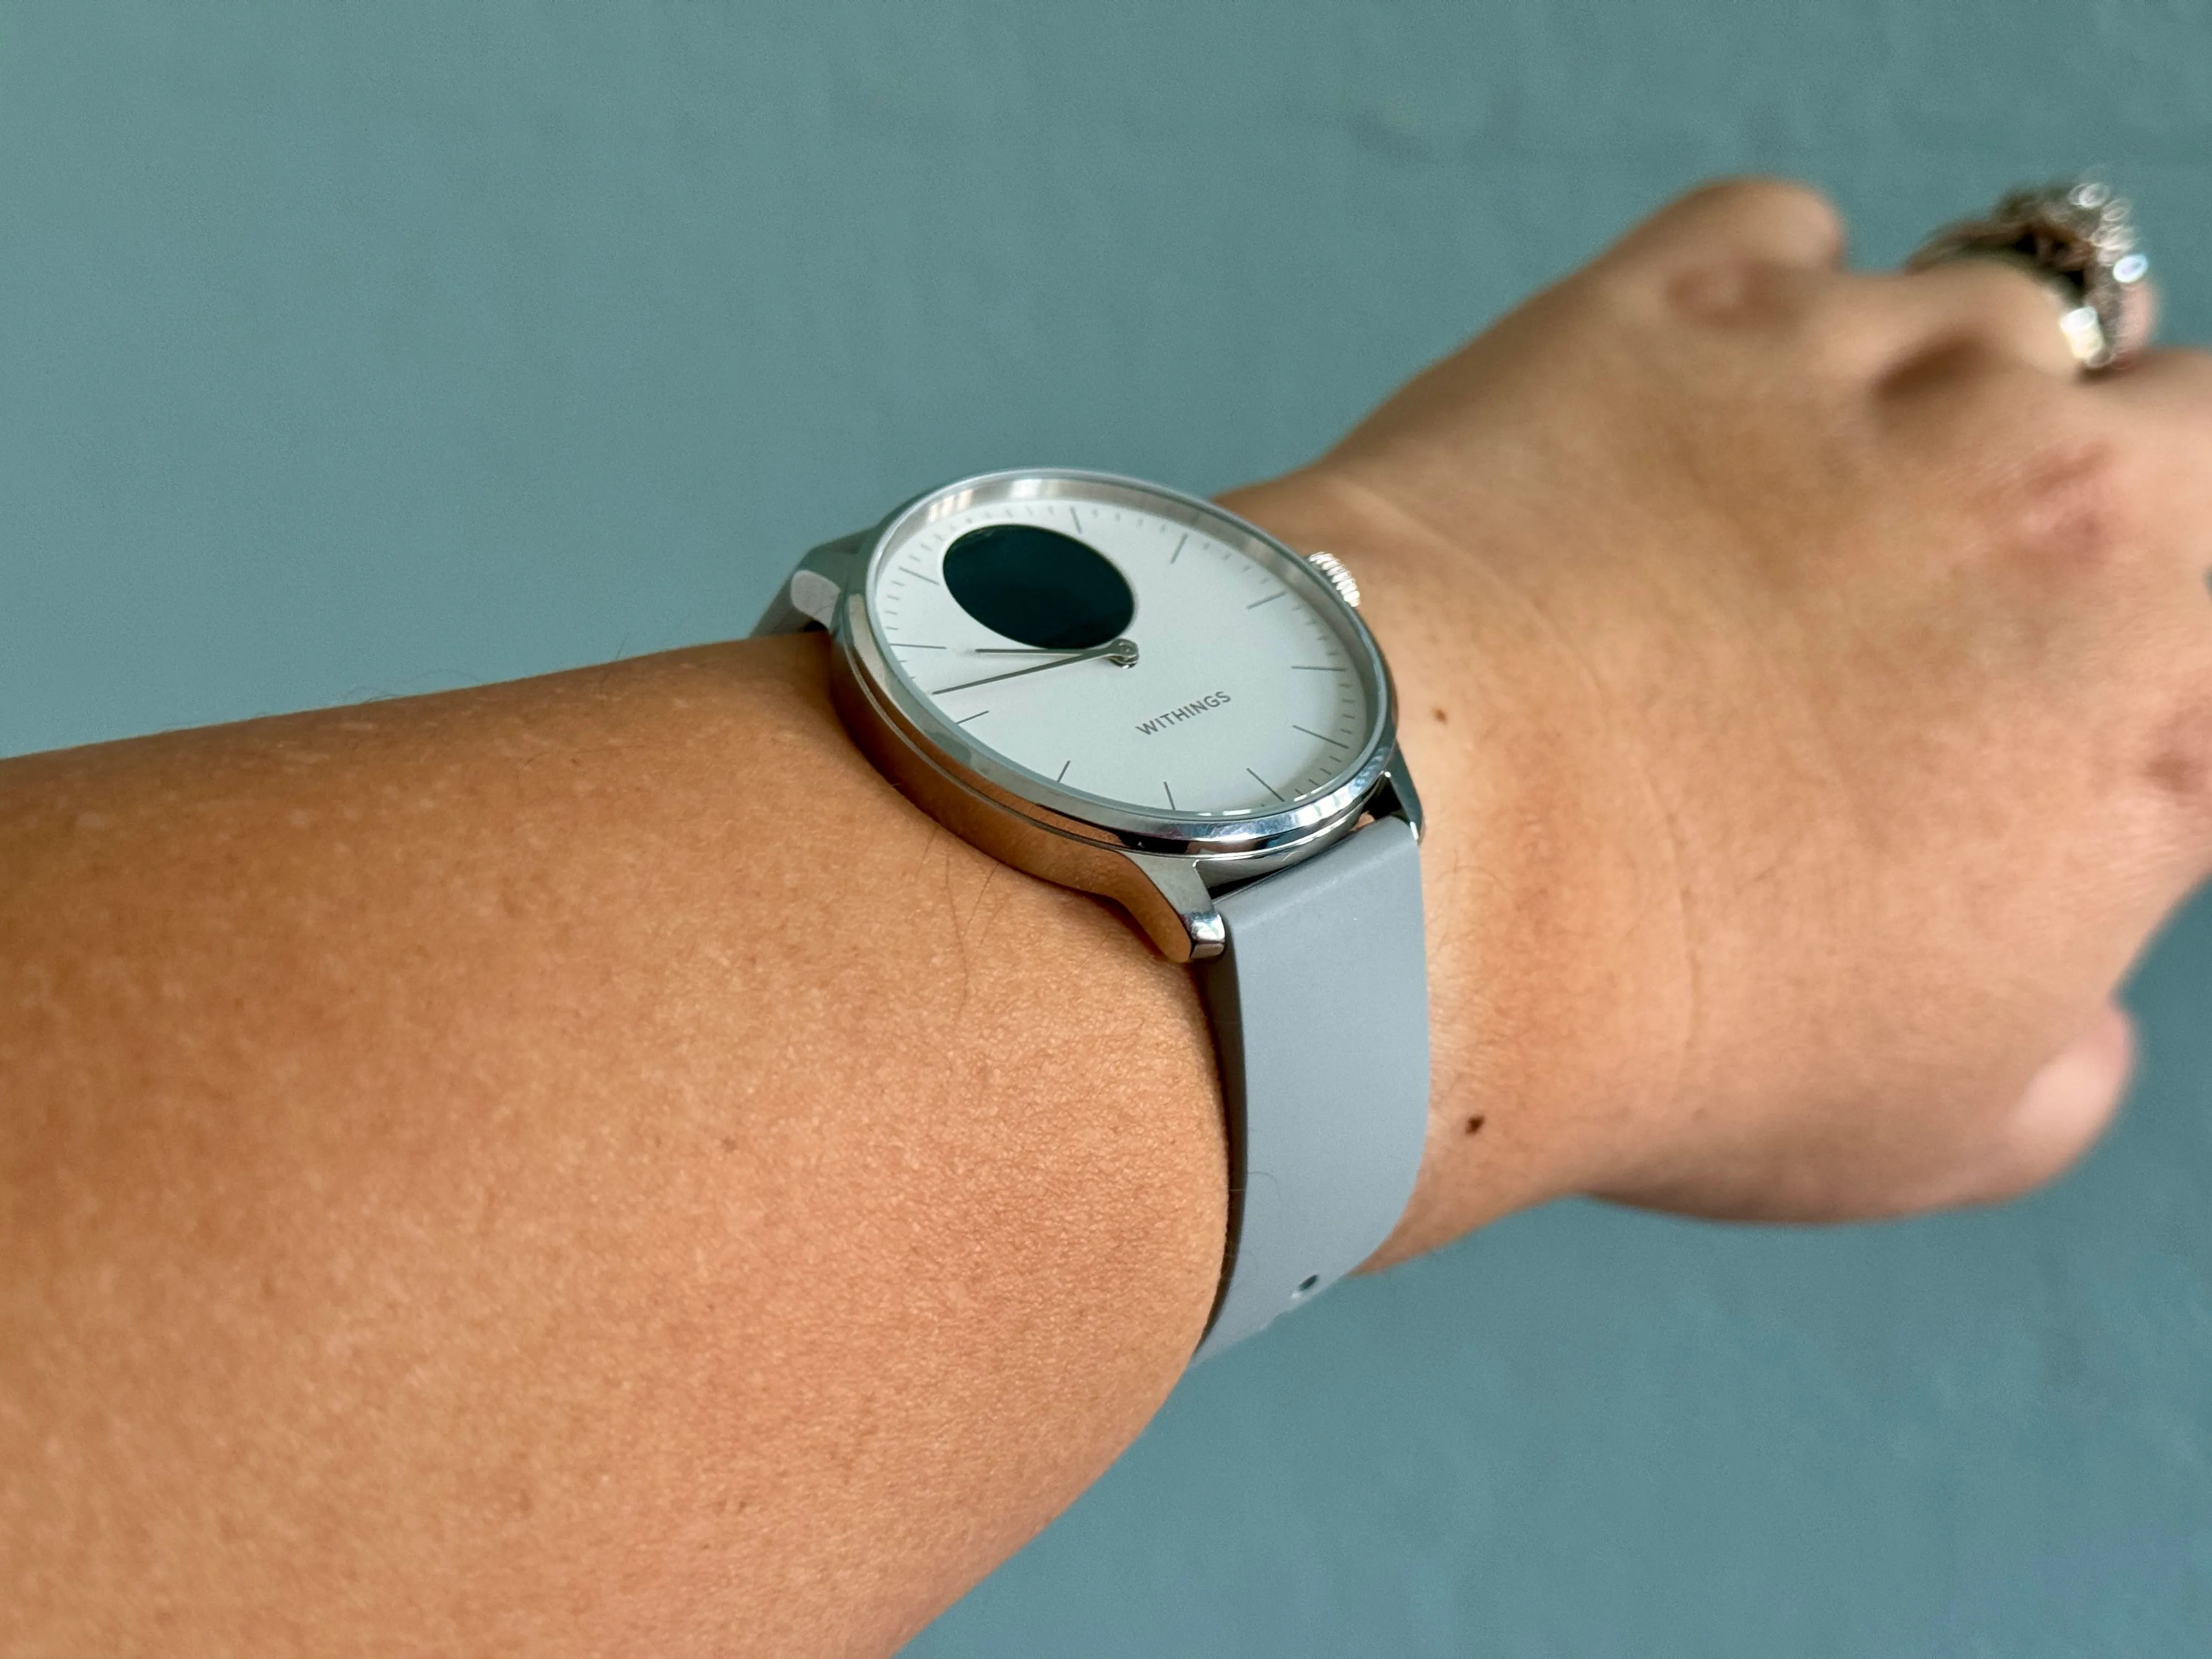 Withings ScanWatch Light indossato al polso con display spento.